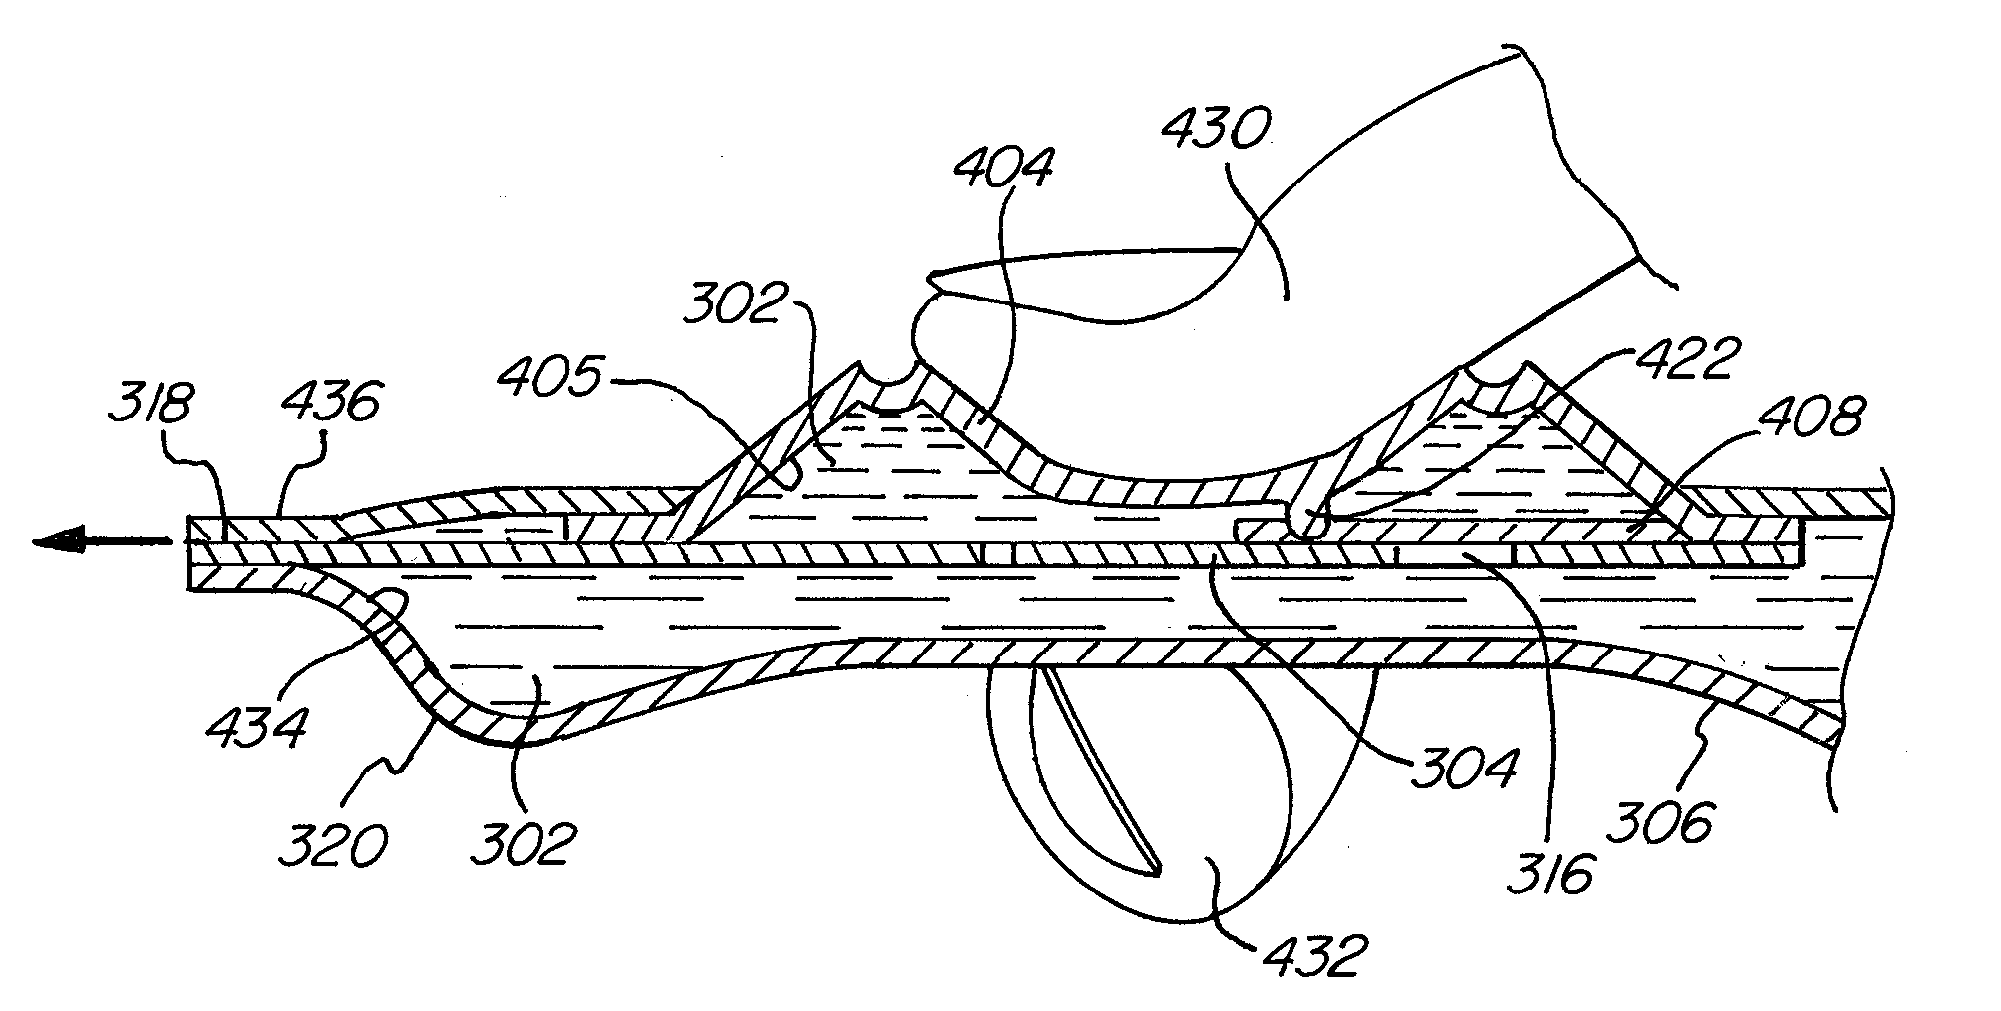 Metering Dispensing System With One-Piece Pump Assembly